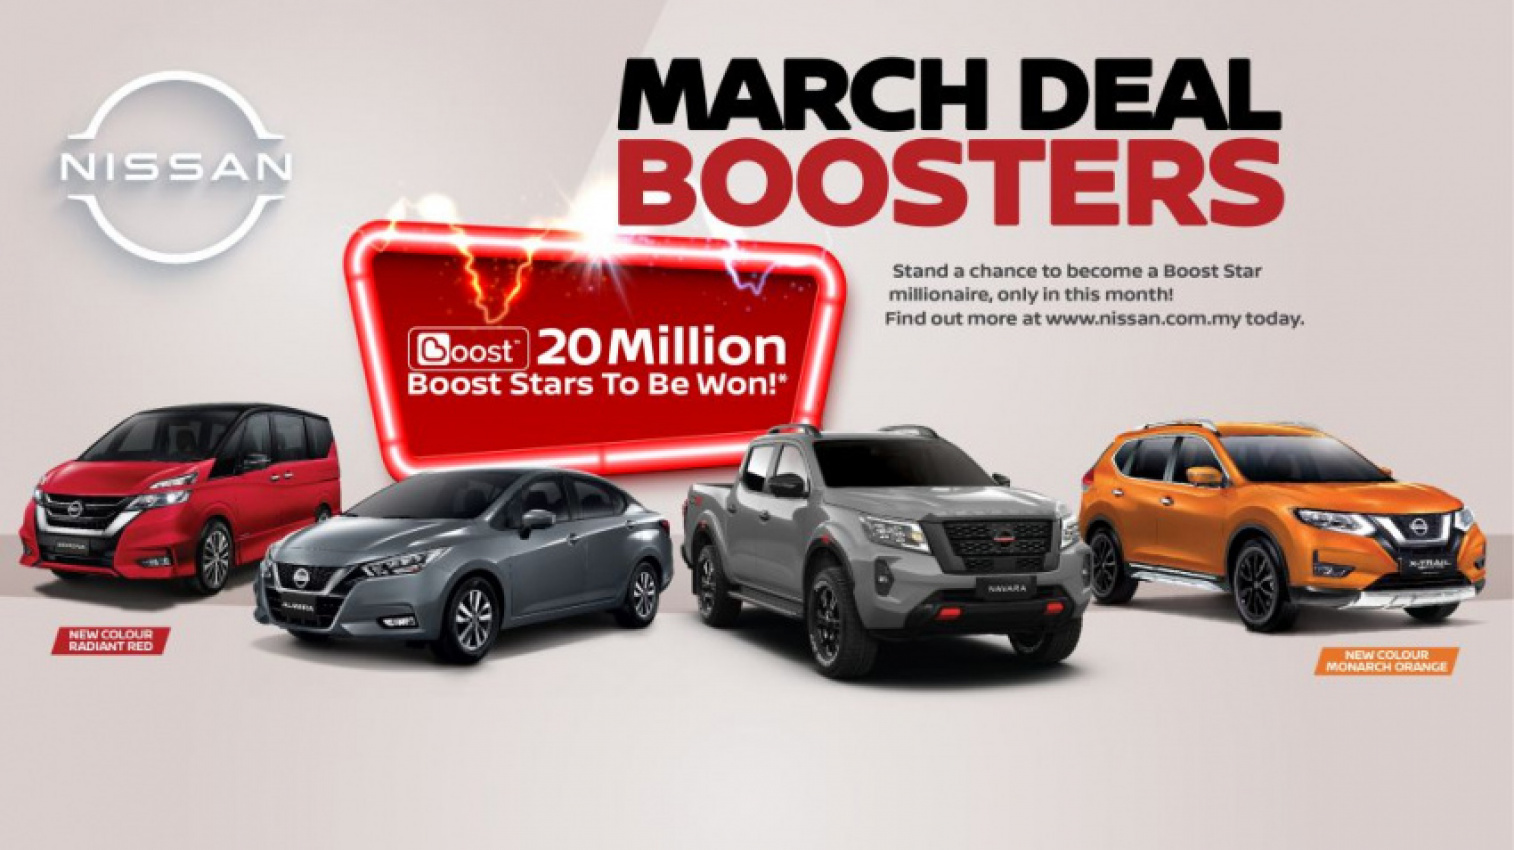 autos, cars, nissan, autos nissan, nissan march deal boosters campaign offers millions of boost stars to customers